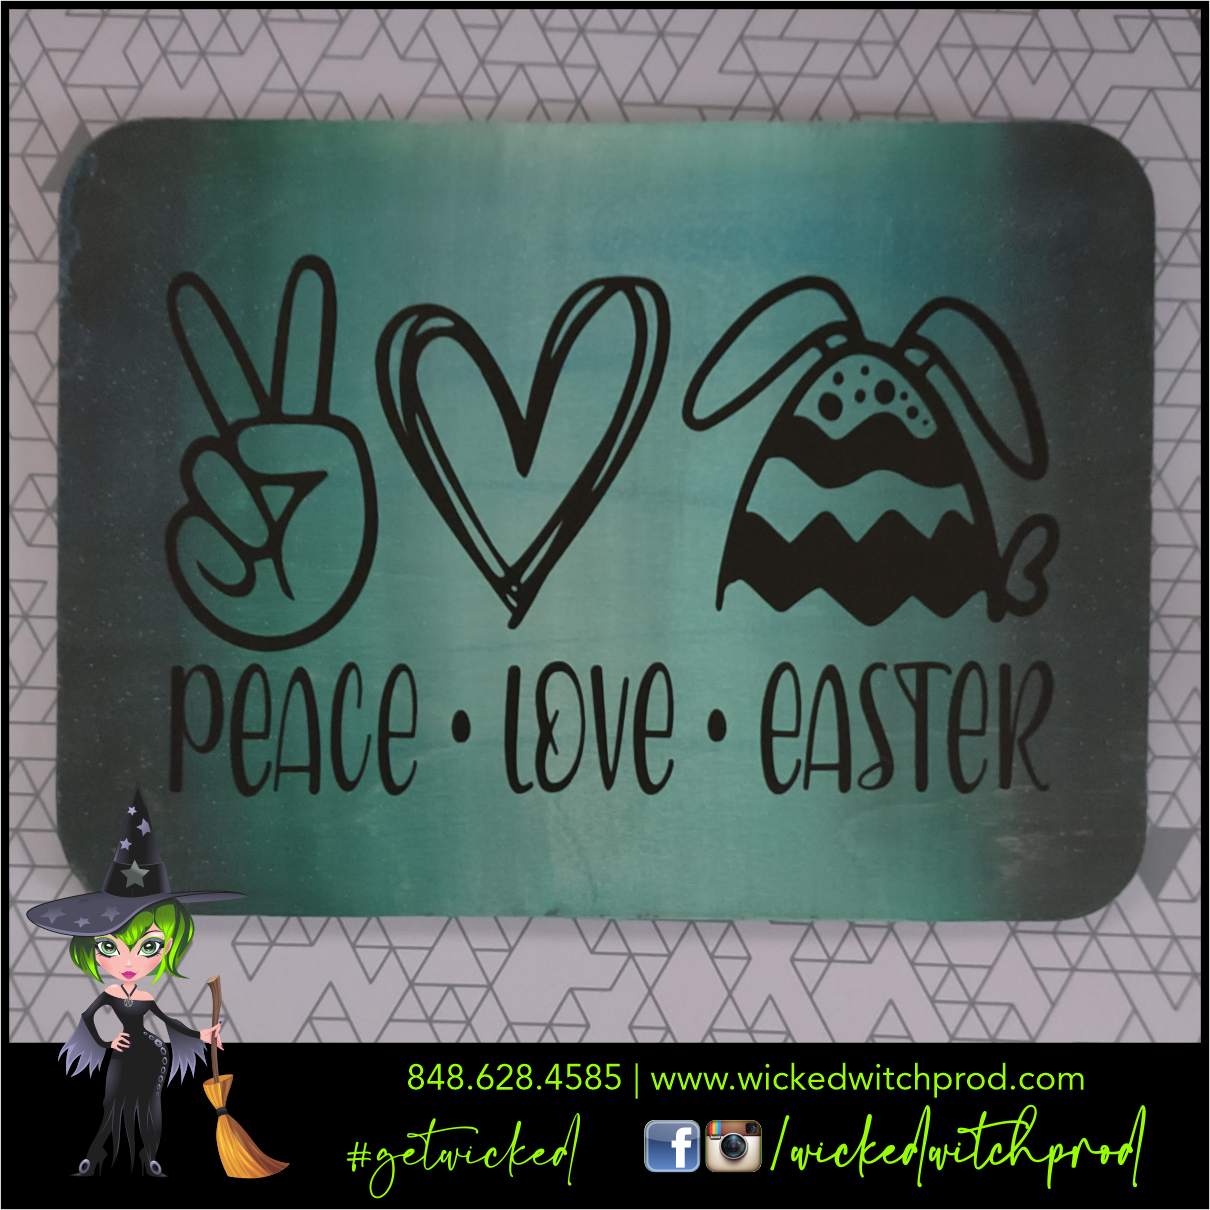 Peace Love Easter Wooden Sign